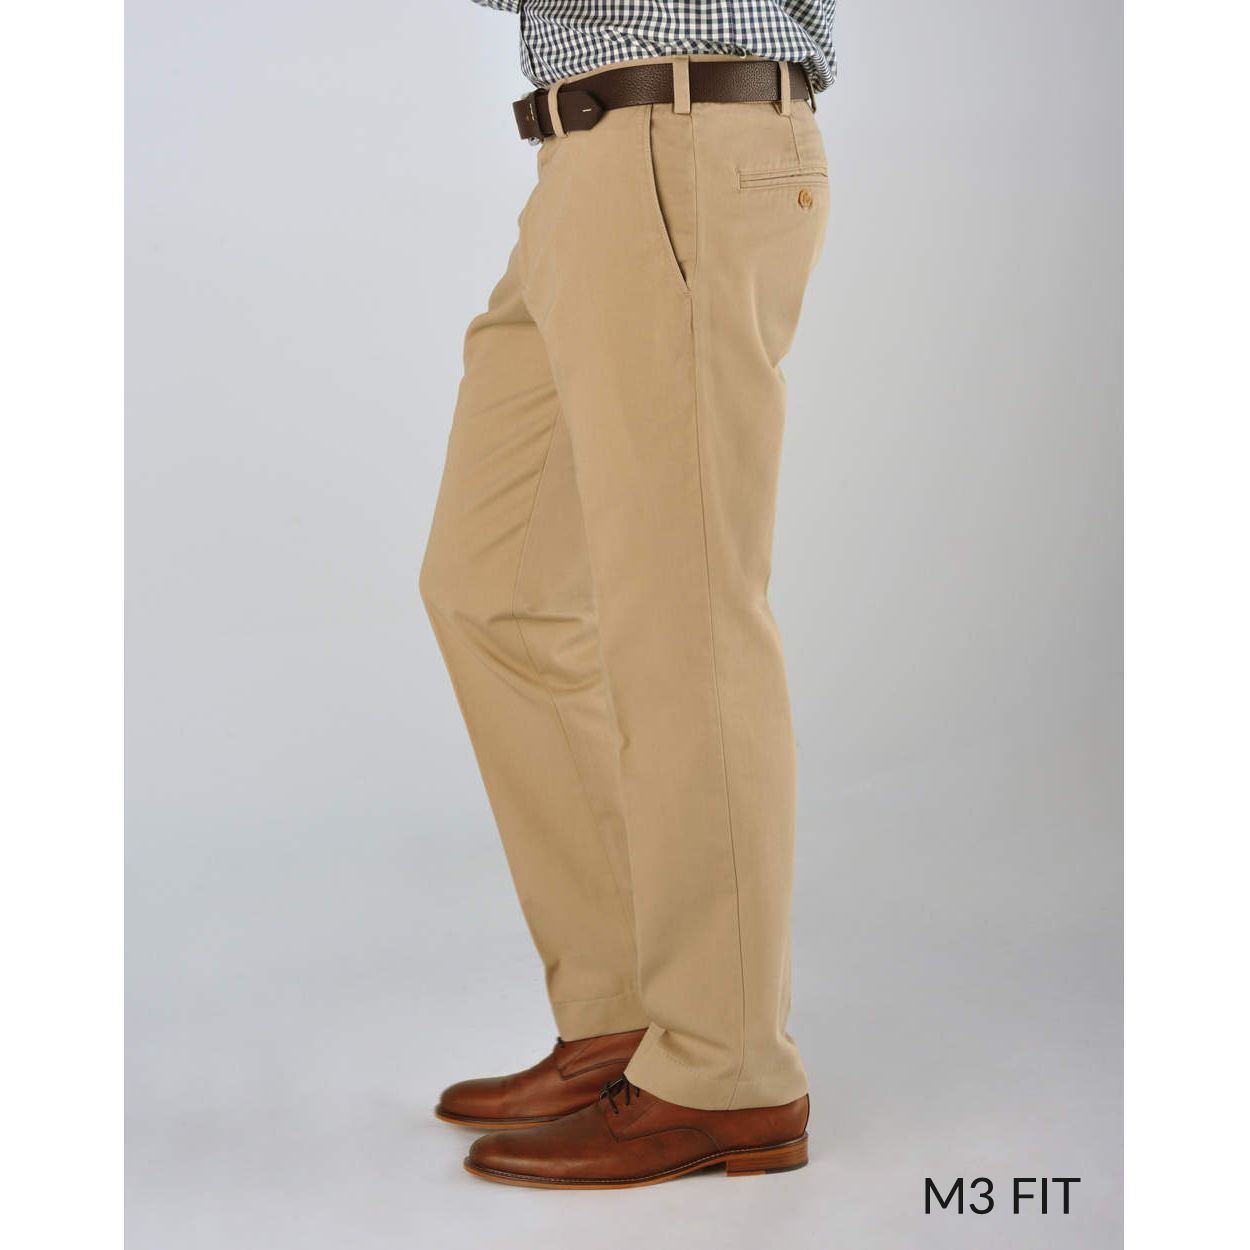 M3 Straight Fit T400 Comfort Stretch Twills in Oyster (Size 40 x 32) by Bills Khakis